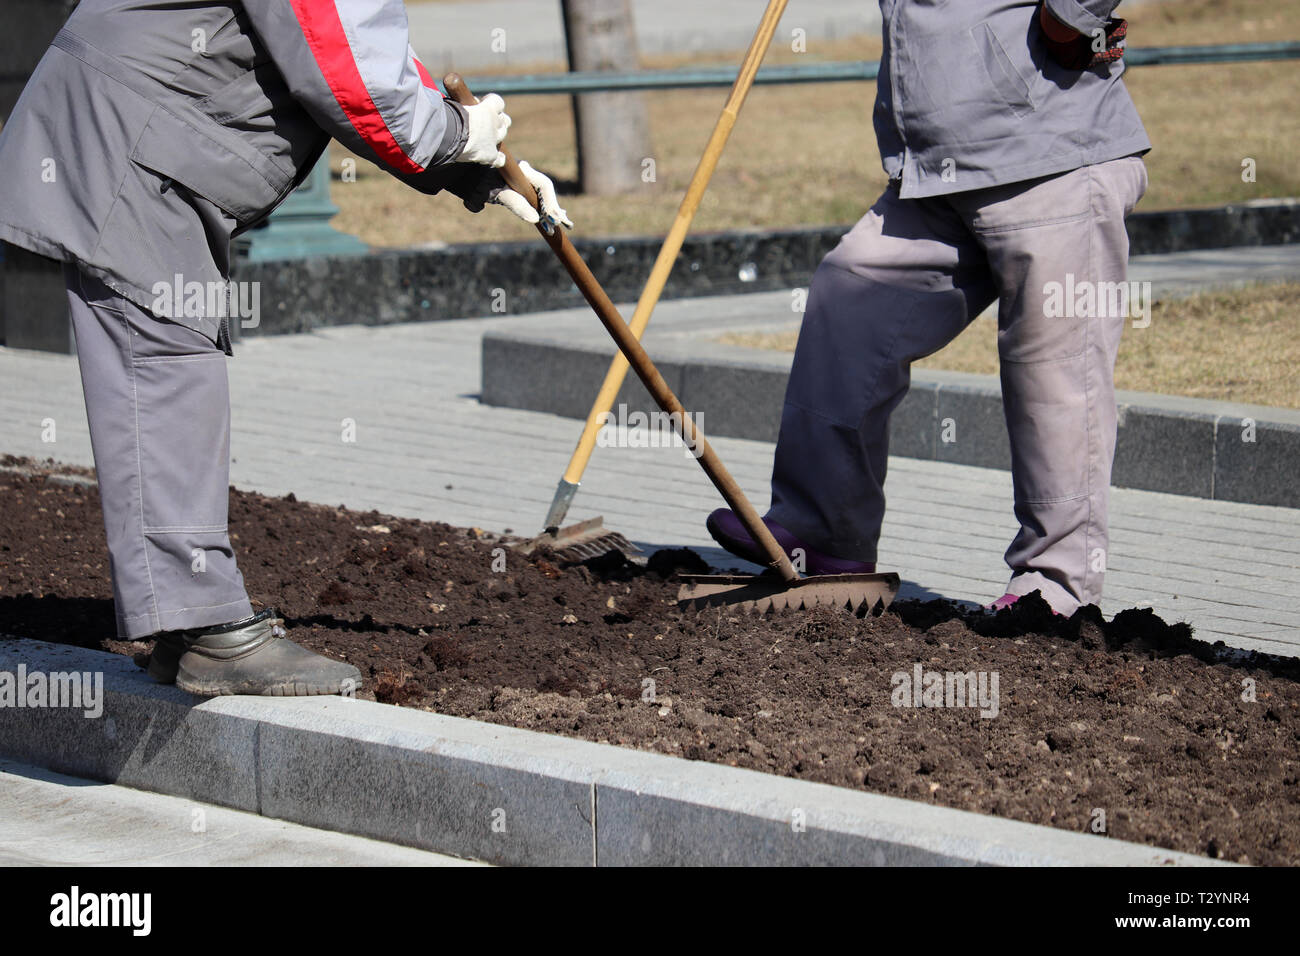 Workers of the municipal service prepare ground for the flower garden. Women gardeners with rakes loosen the soil, improvement city park in spring Stock Photo